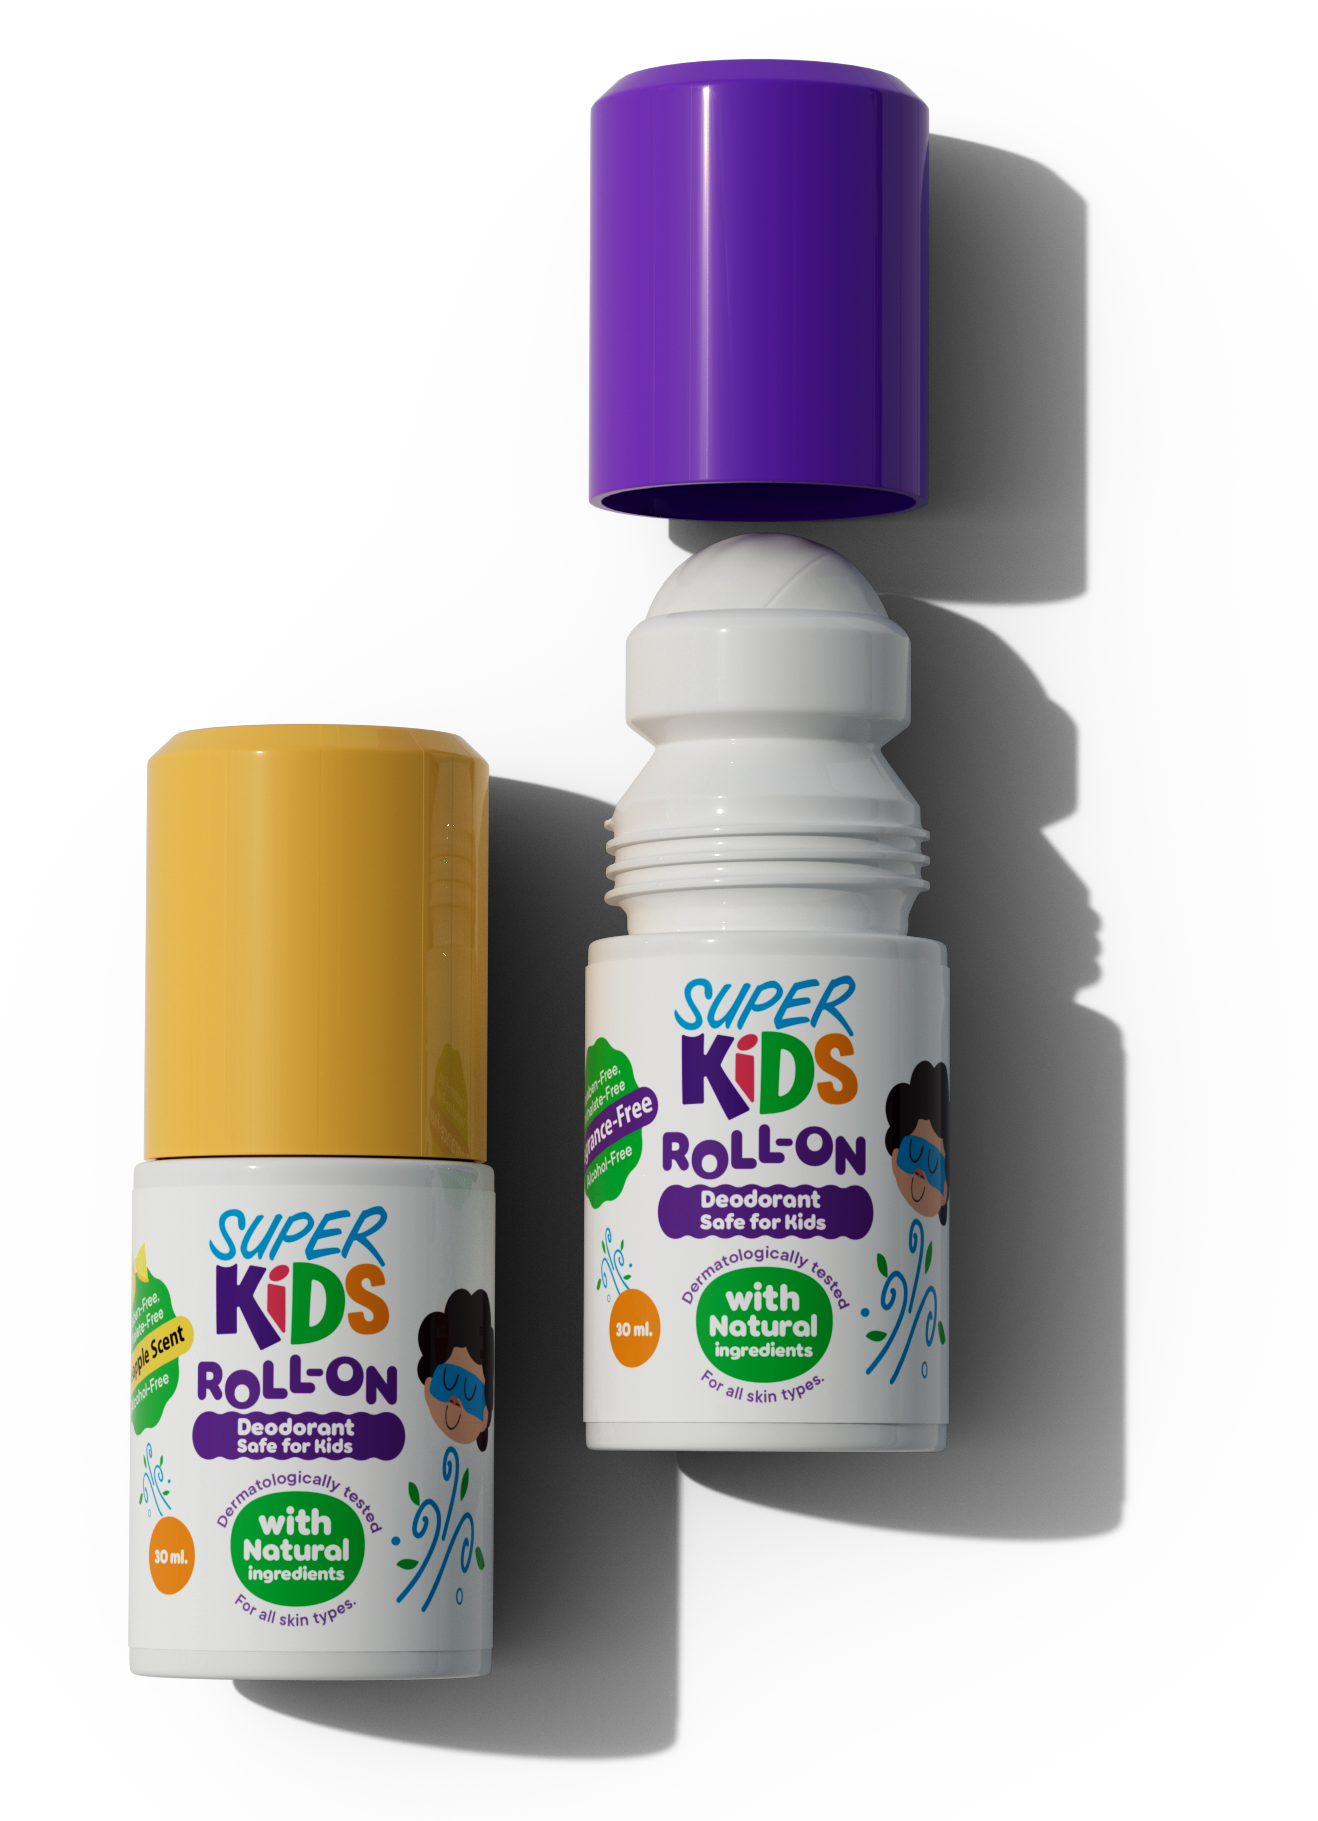 Superkids Roll On Pineapple Scent